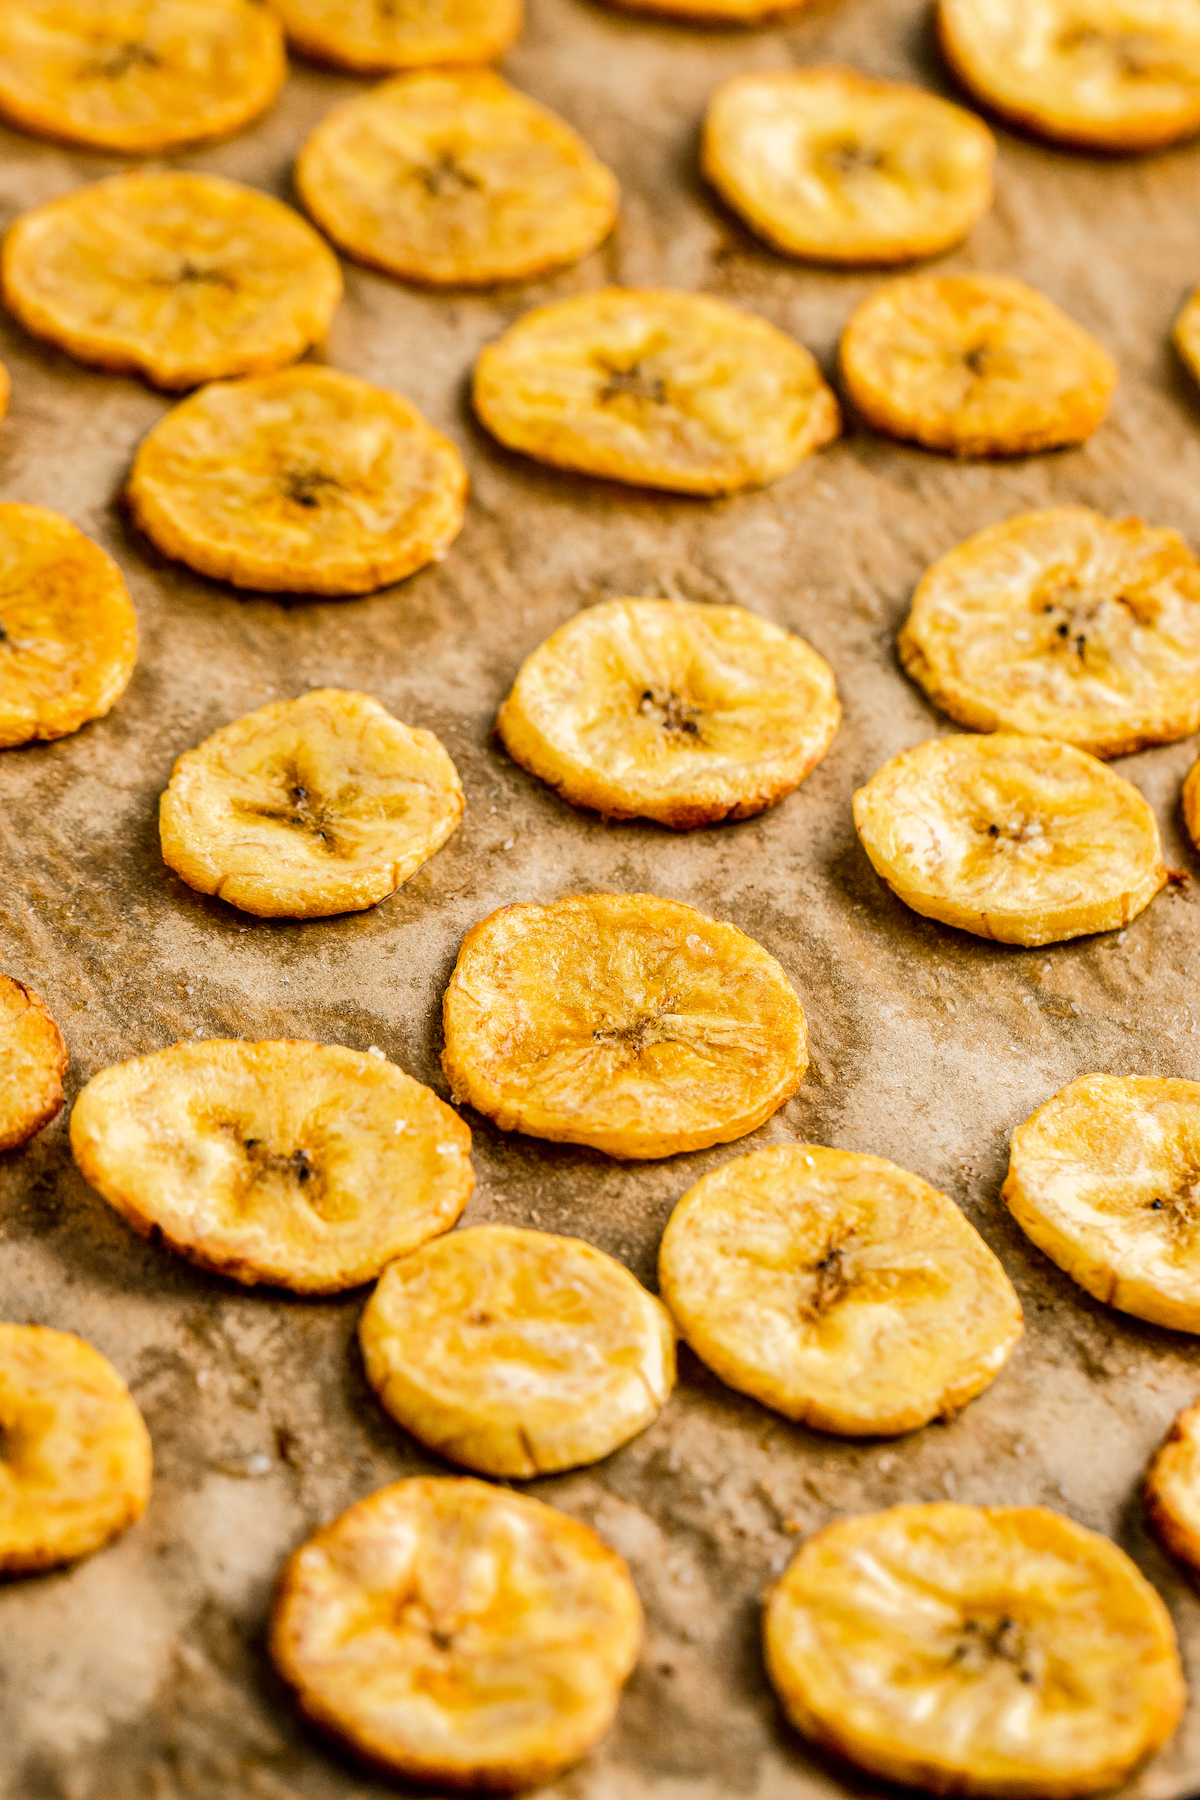 Thin slices of baked plantain on a parchment-lined baking sheet.